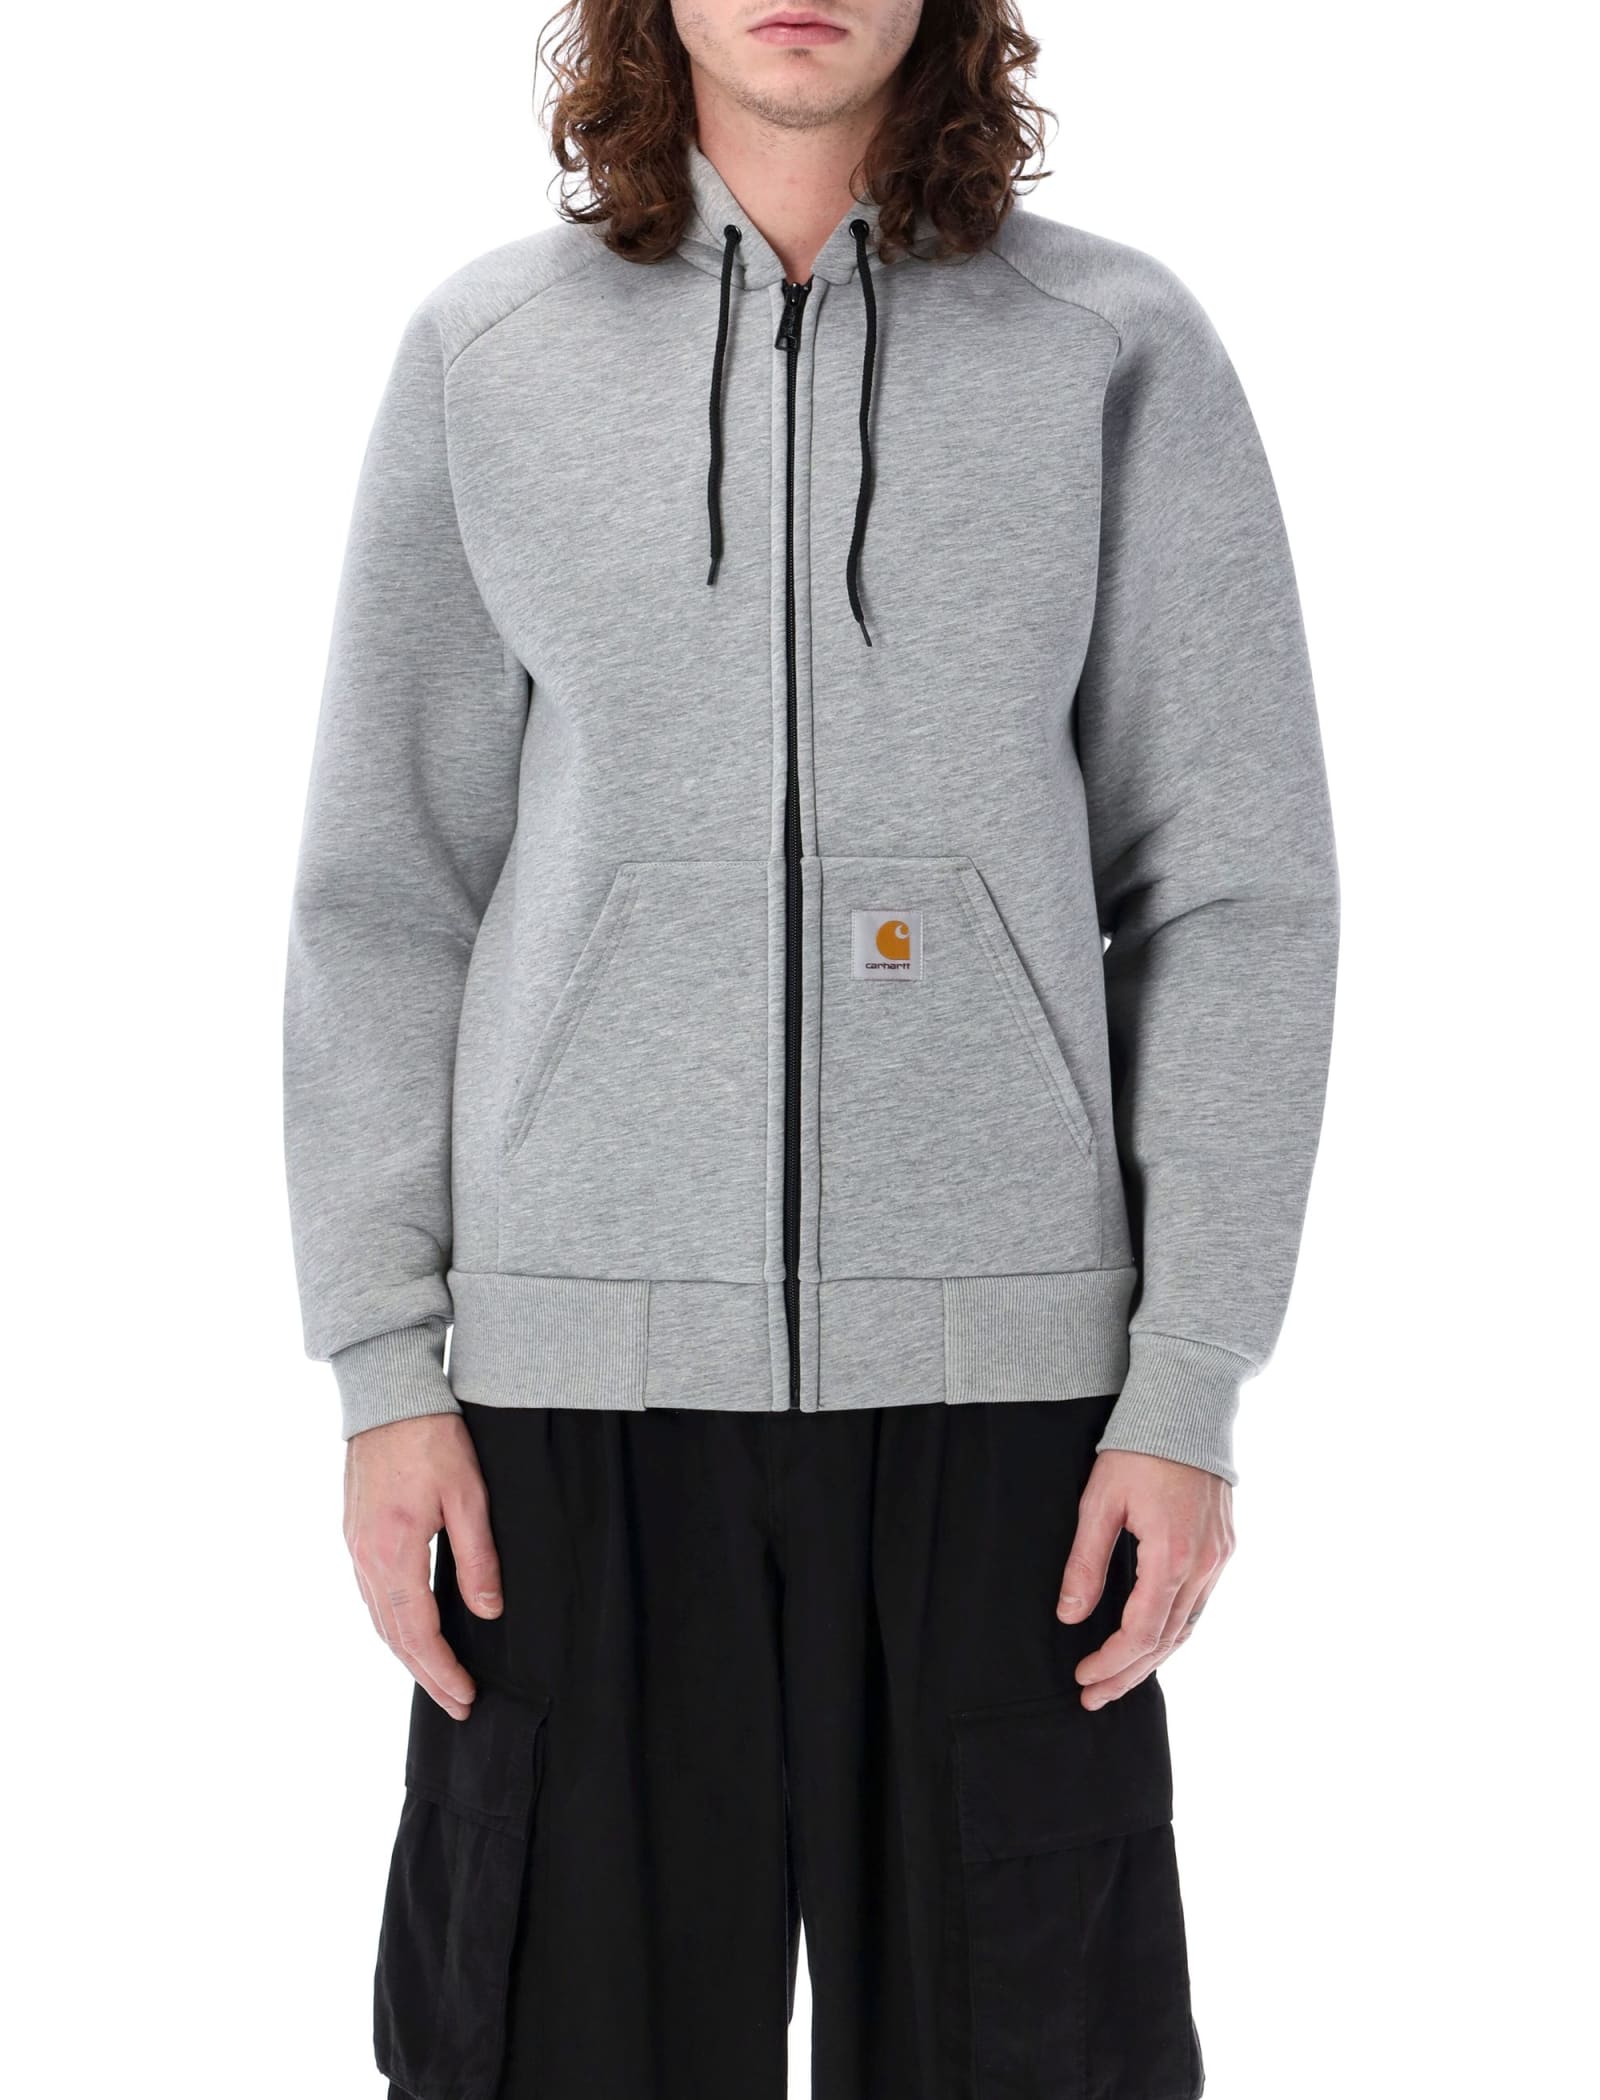 Car-lux Hooded Jacket